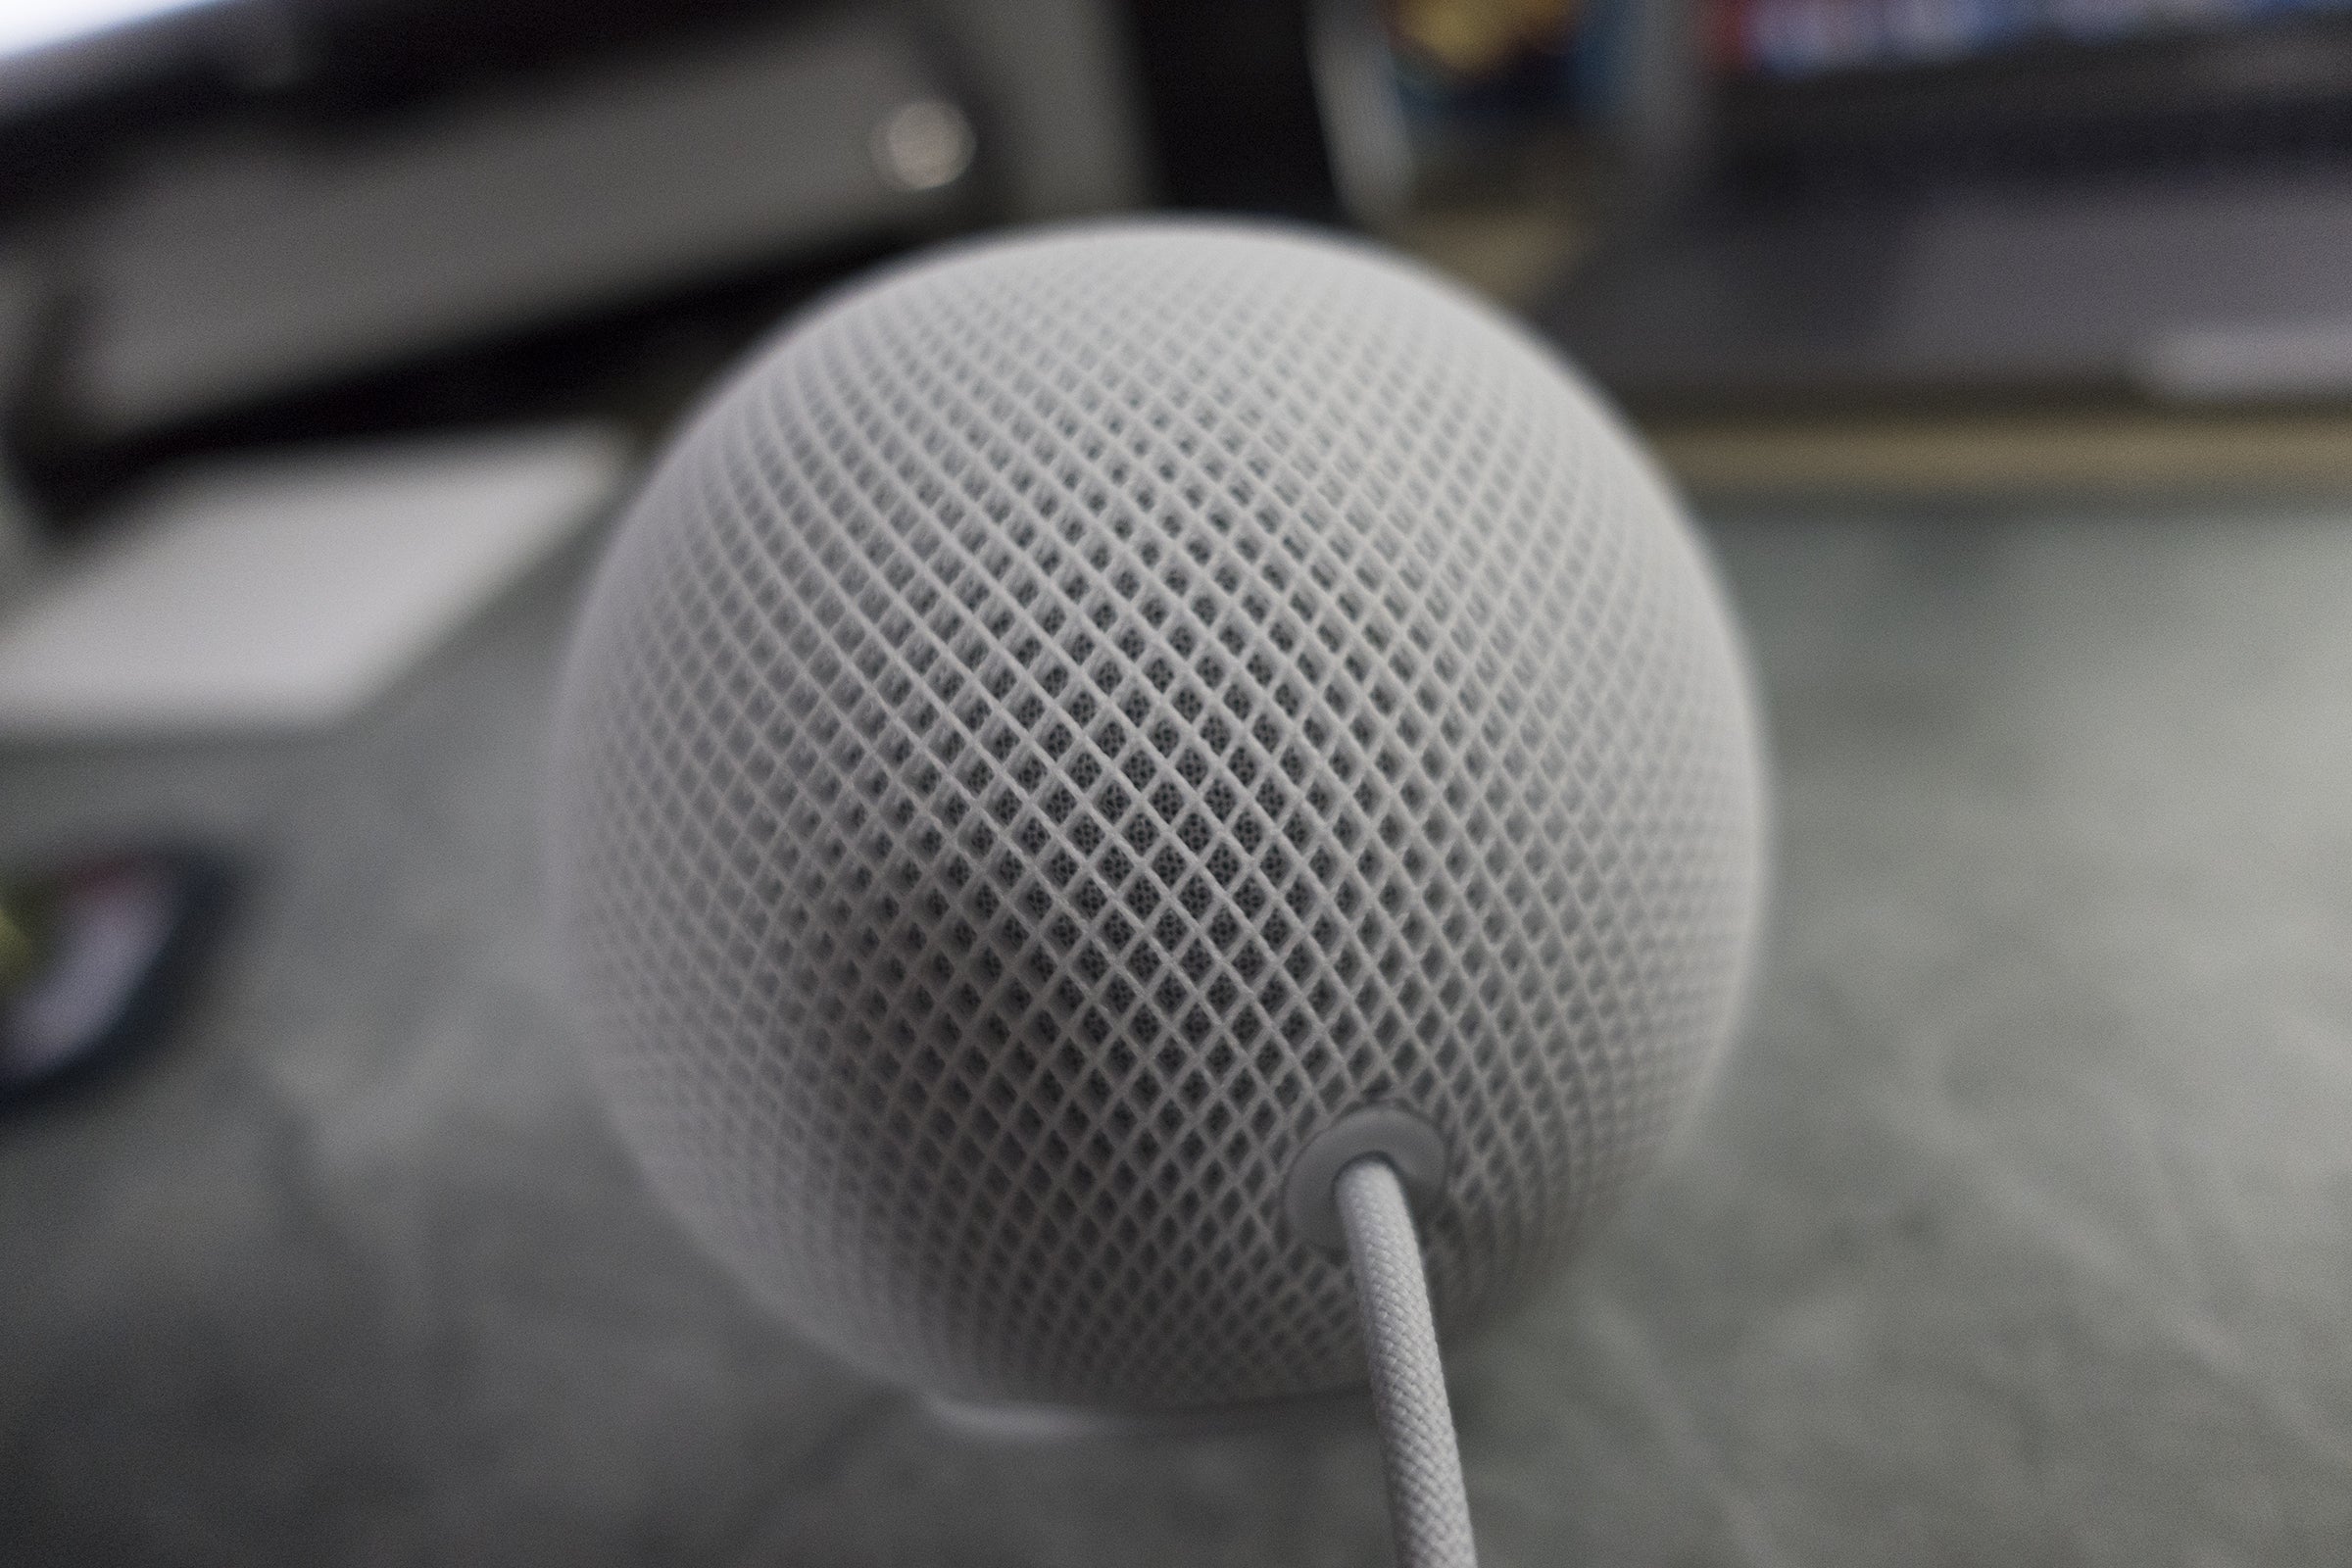 HomePod mini review: Small sound and familiar frustrations - Macworld